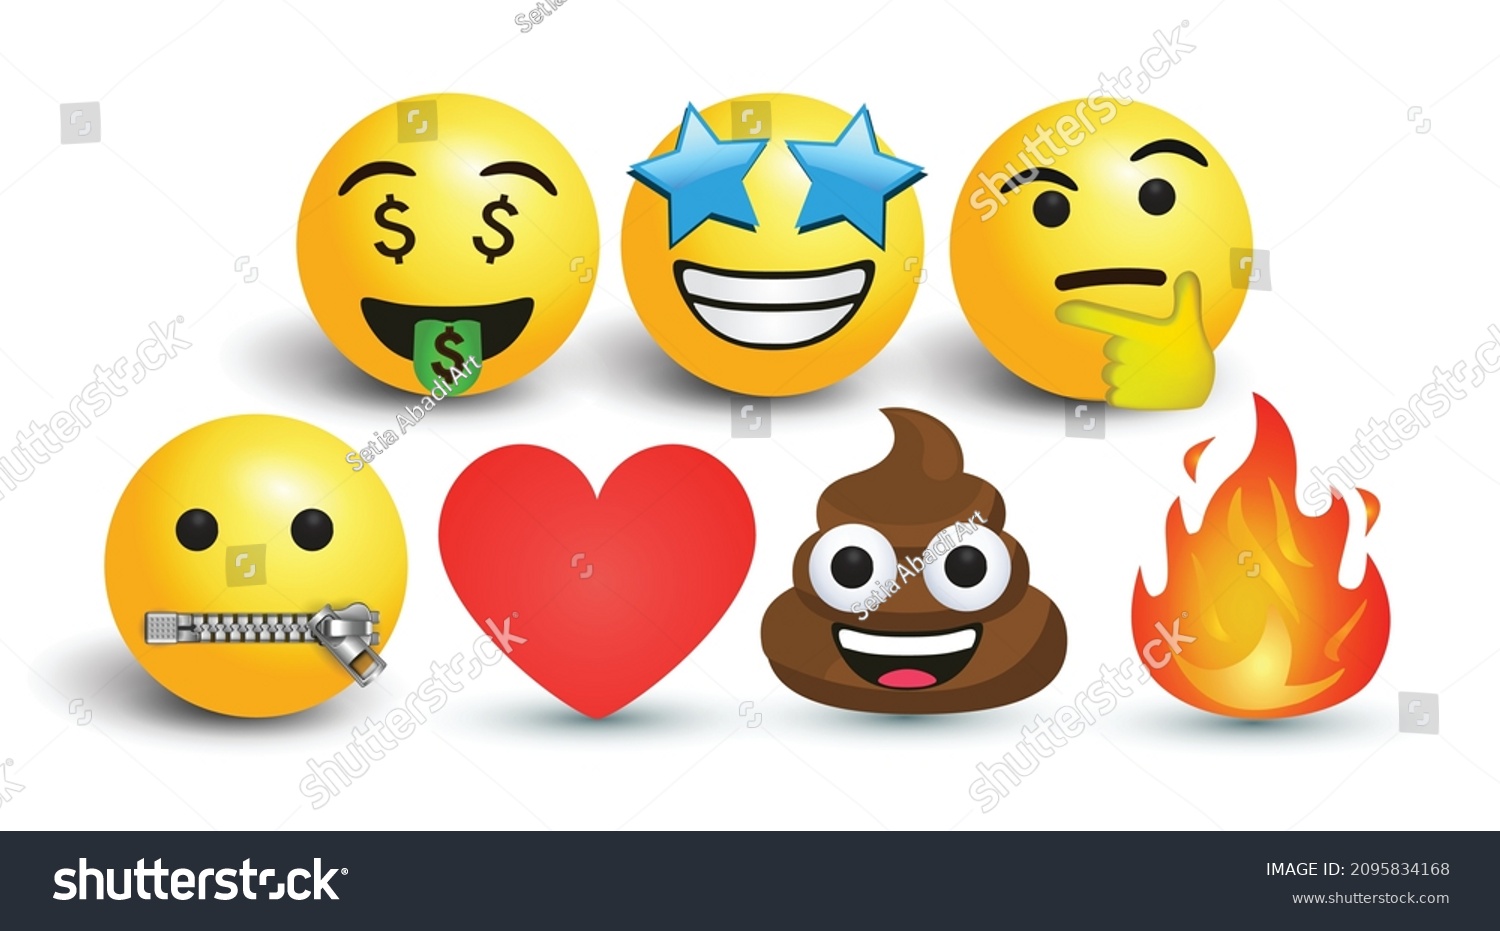 SVG of 3d vector round yellow cartoon bubble emoticons social media Facebook Instagram Whatsapp chat comment reactions, icon template face money, zip, thinking fire star love heart emoji character message svg